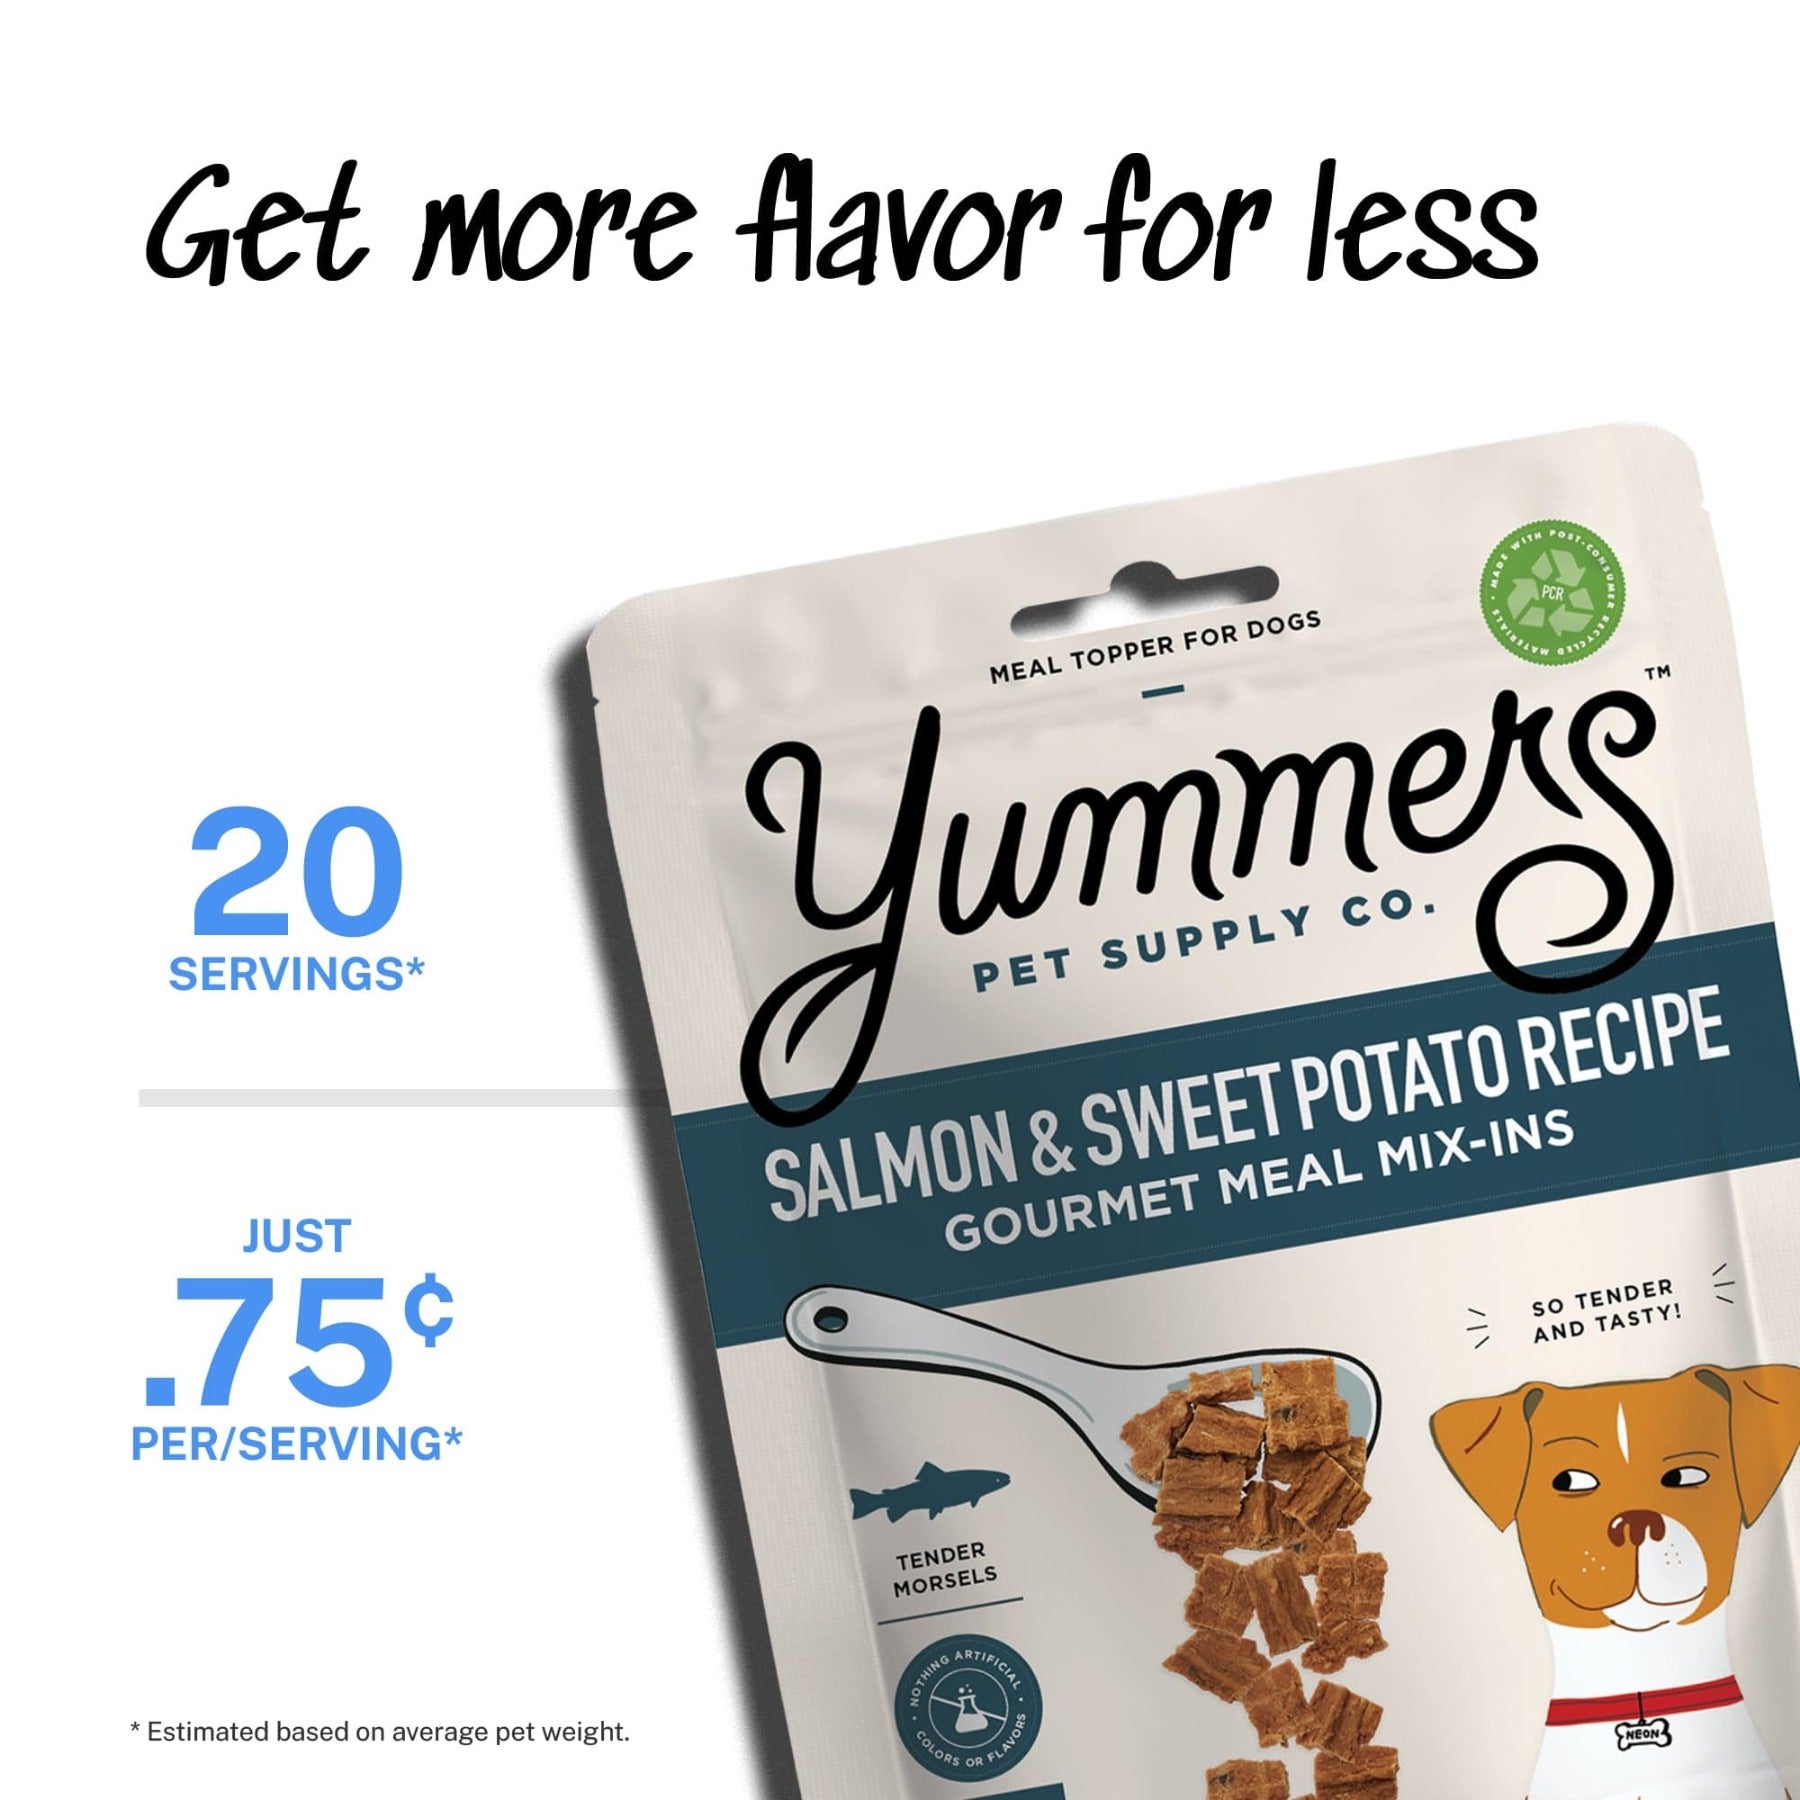 Salmon & Sweet Potato Recipe Gourmet Meal Mix-in for Dogs, 5 oz. - Yummers